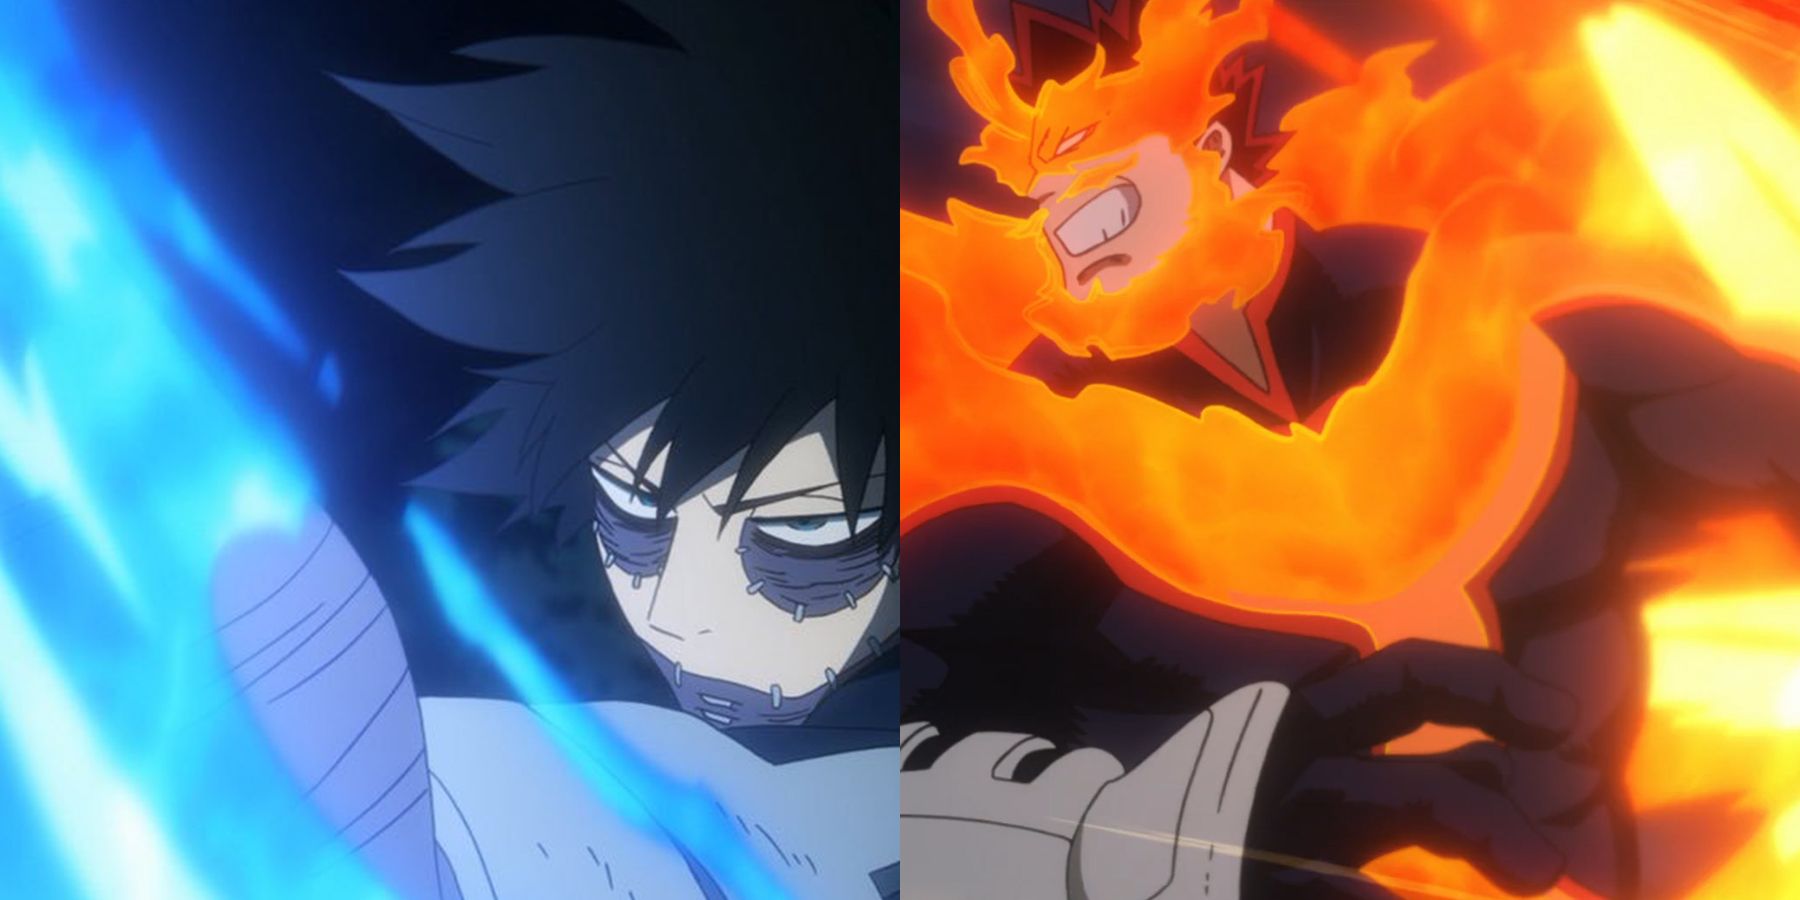 Endeavor and Dabi using their quirks side by side